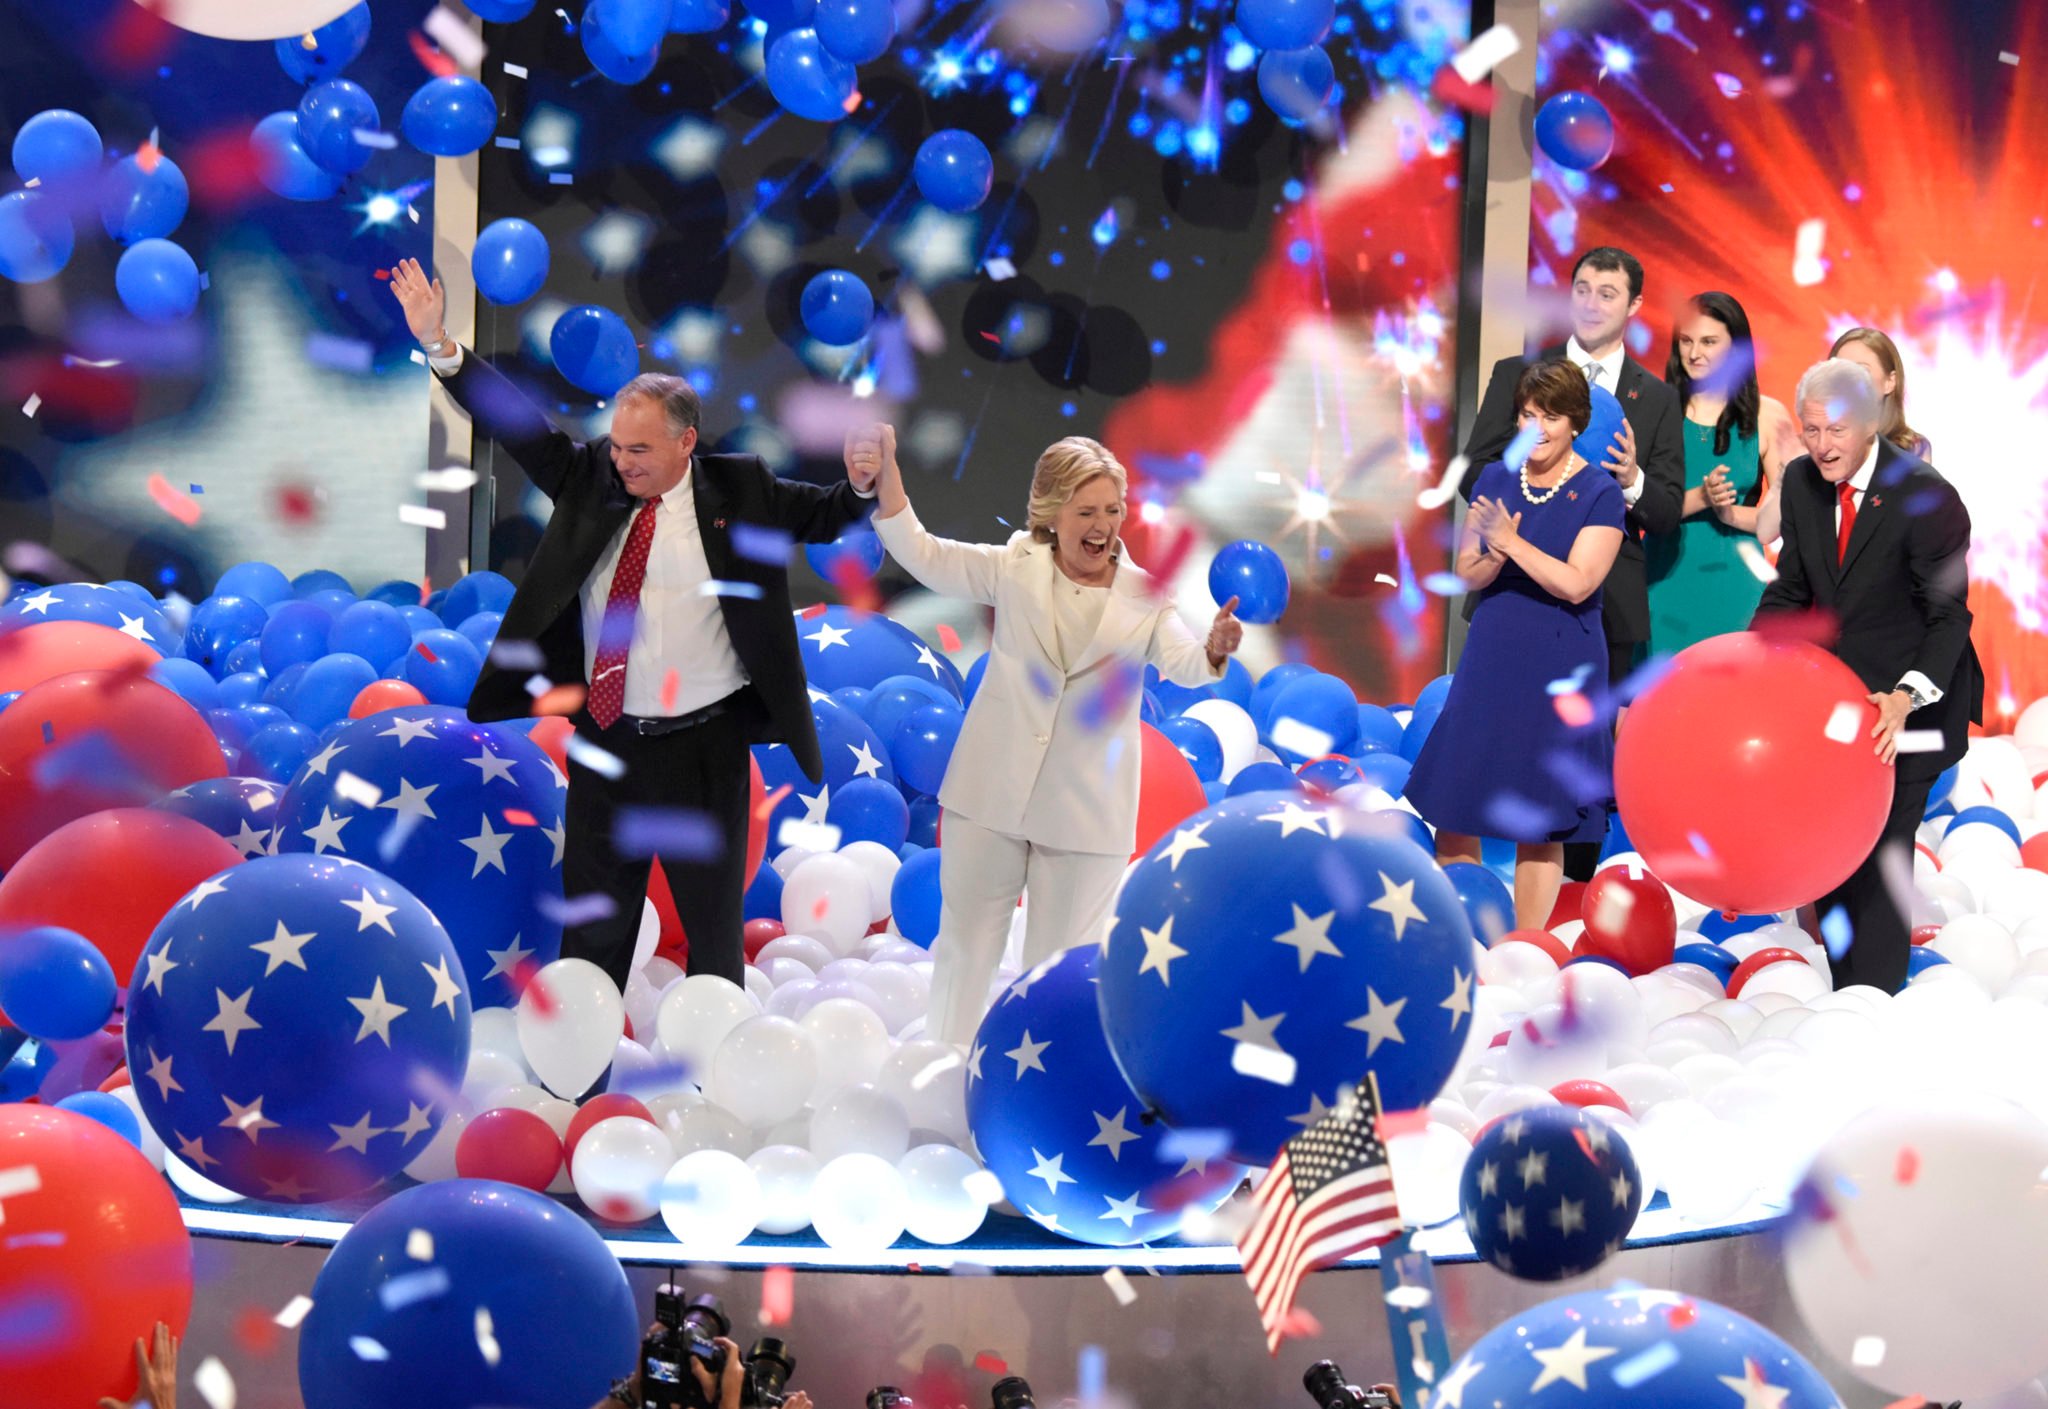 Hillary Clinton and Tim Kaine join hands as balloons drop on the last night of the 2016 Democratic National Convention in Philadelphia.